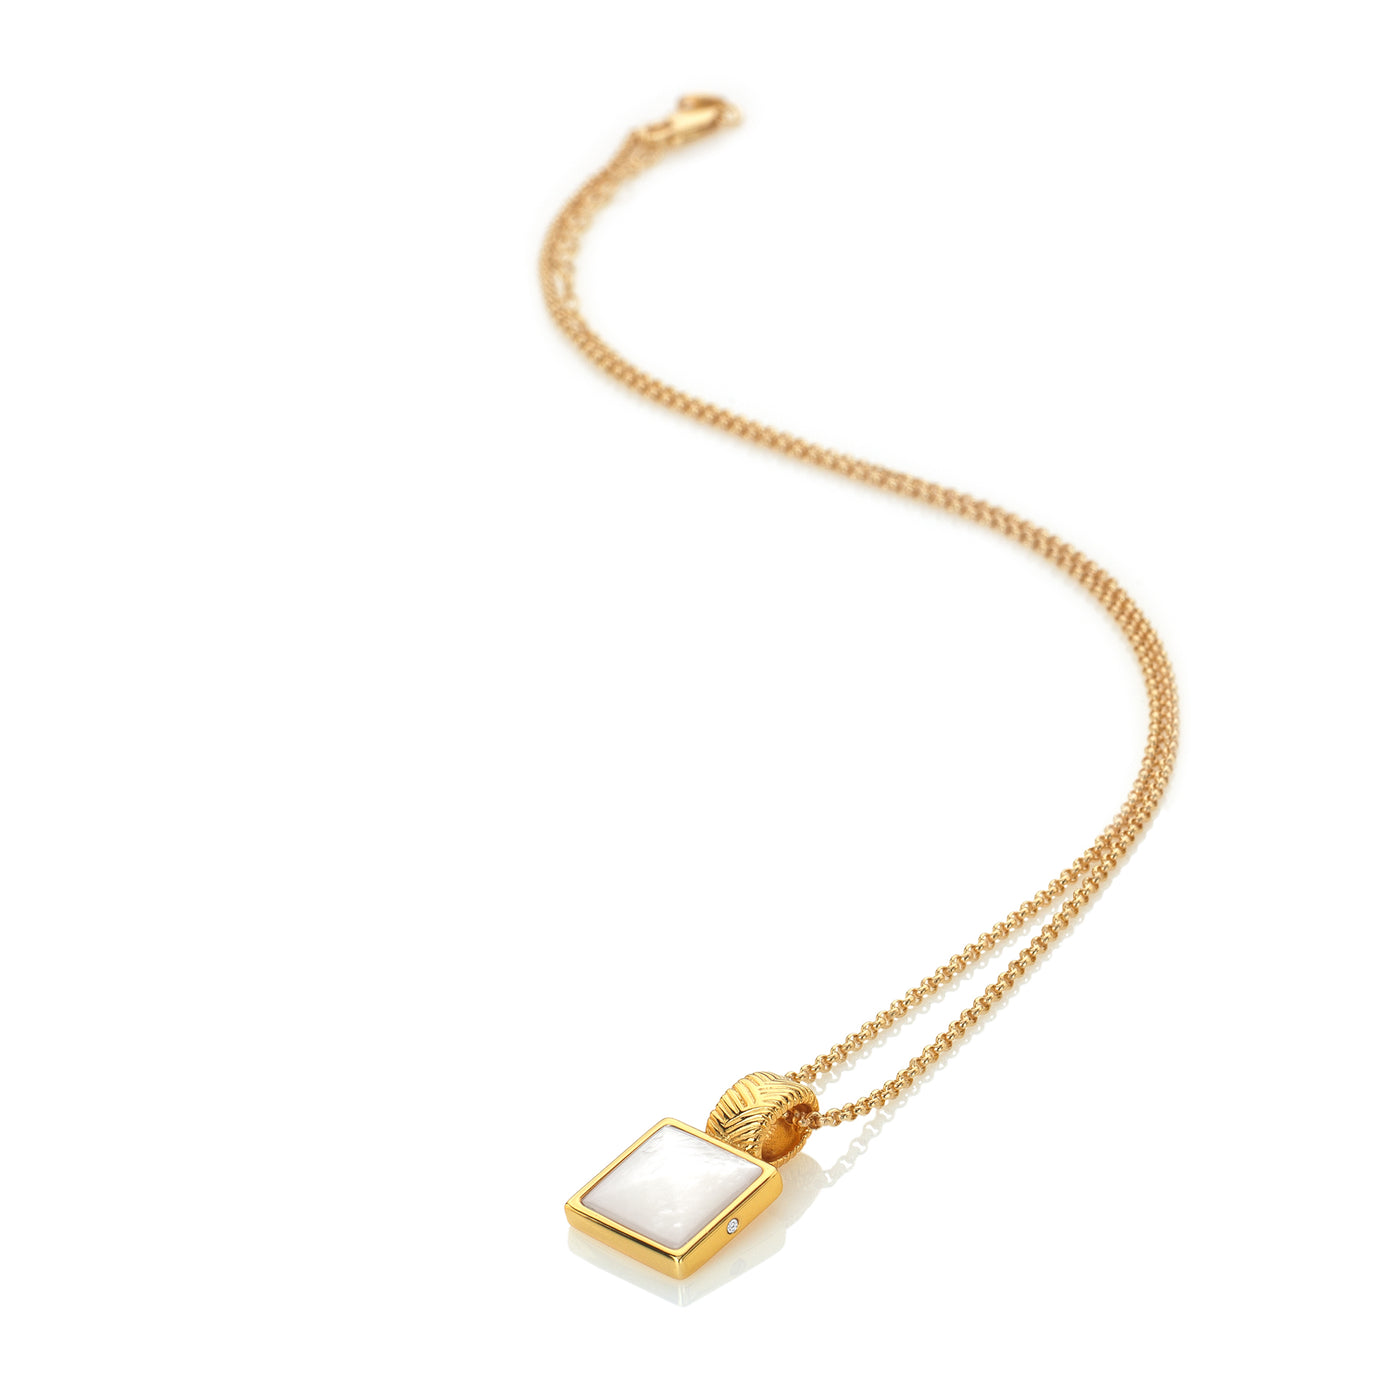 Hot Diamonds by Jac Jossa -18ct Gold Plated Sterling Silver Calm Mother of Pearl Square Pendant